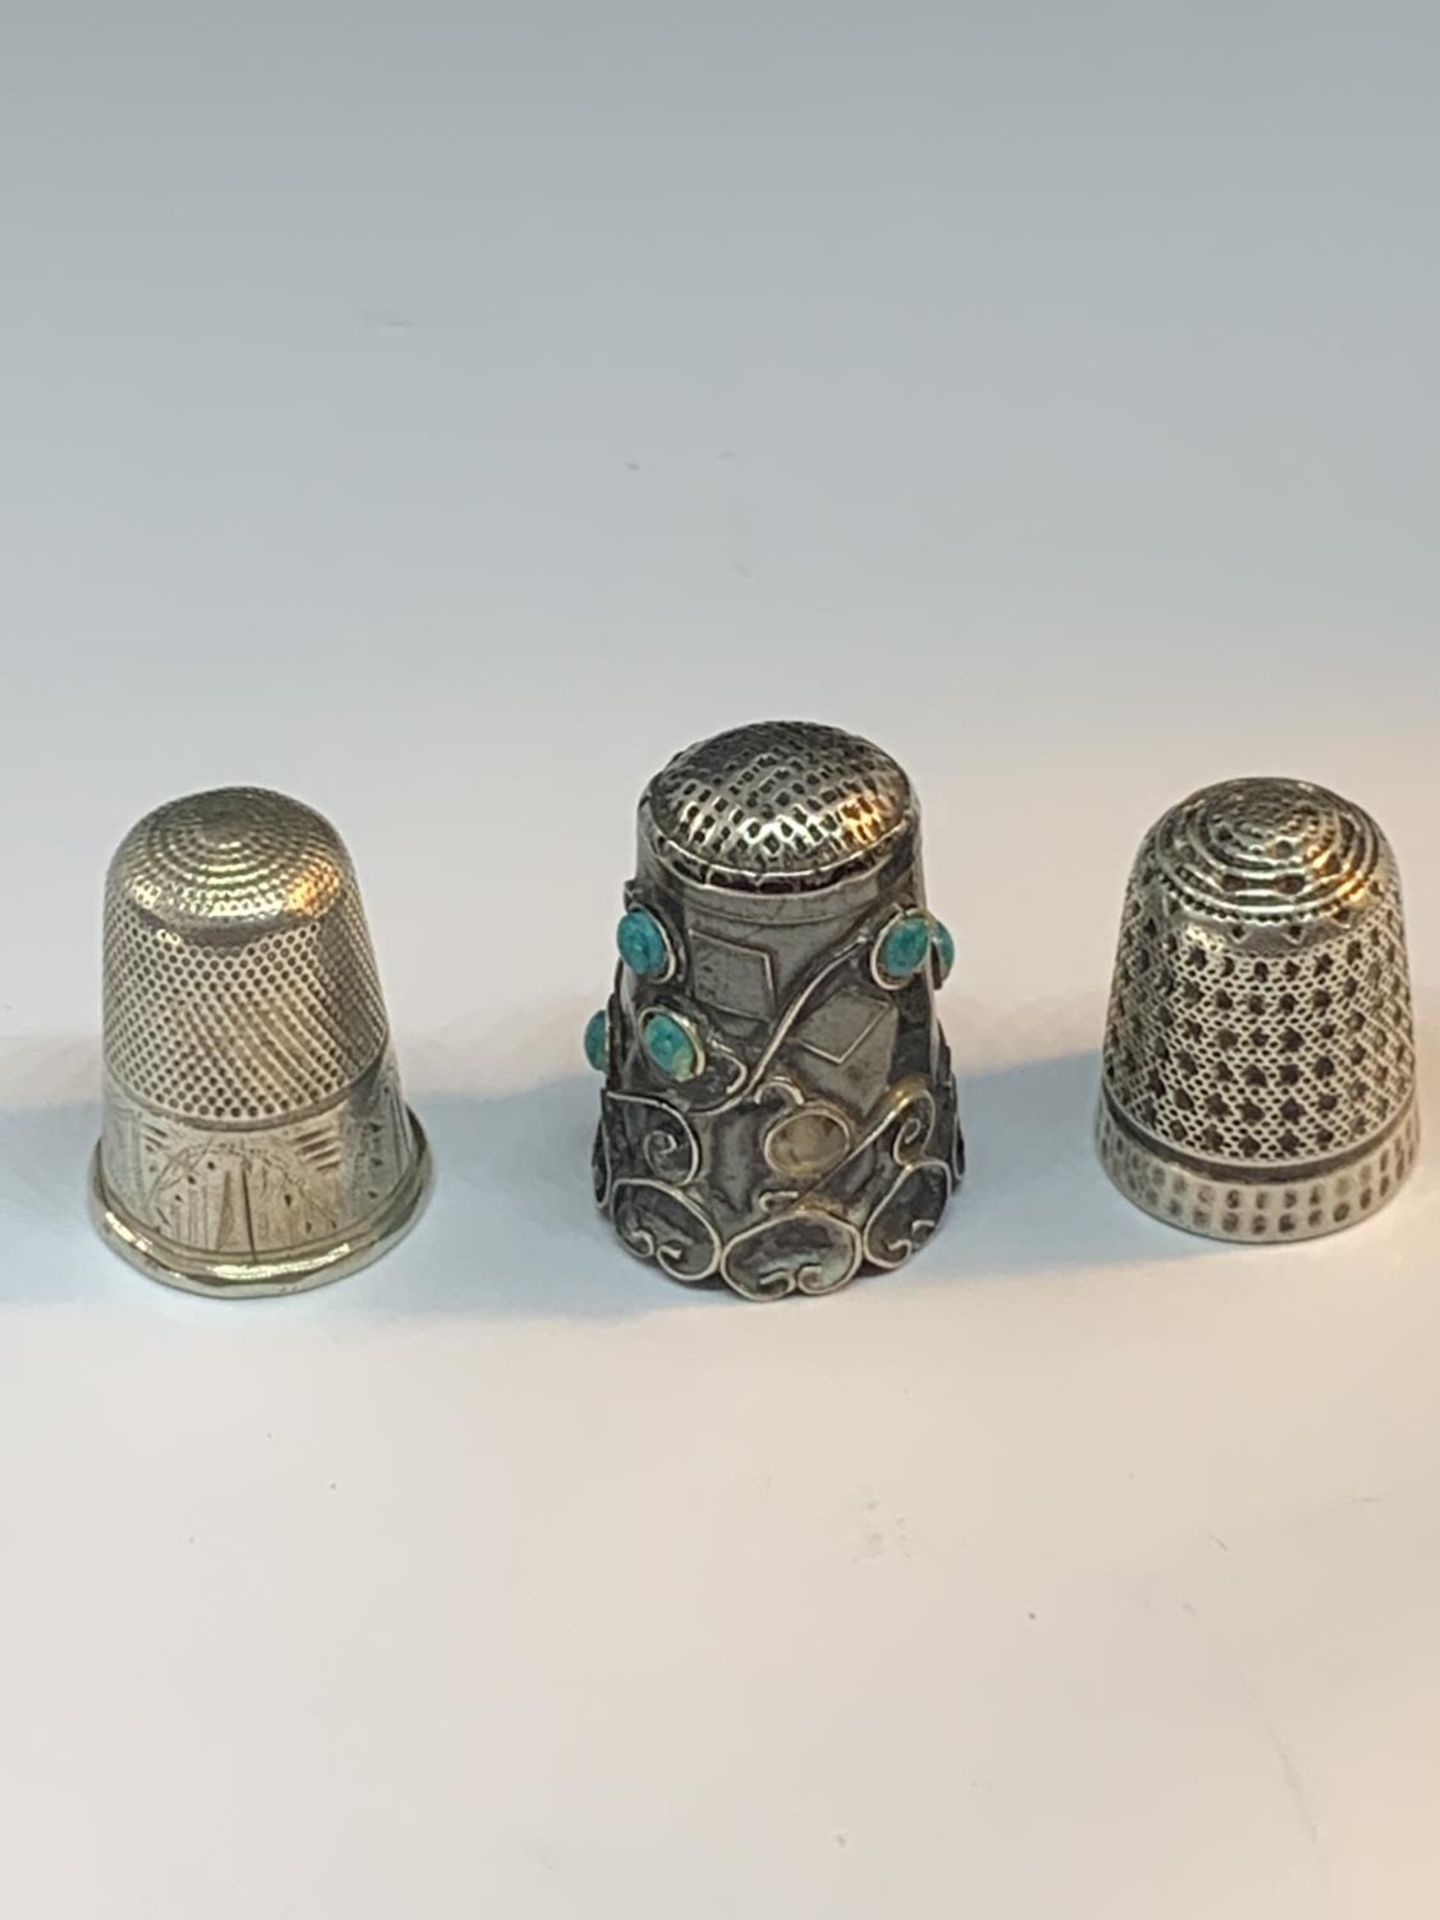 THREE THIMBLES ONE WITH DECORATIVE TURQUOISE STONES - Image 2 of 3